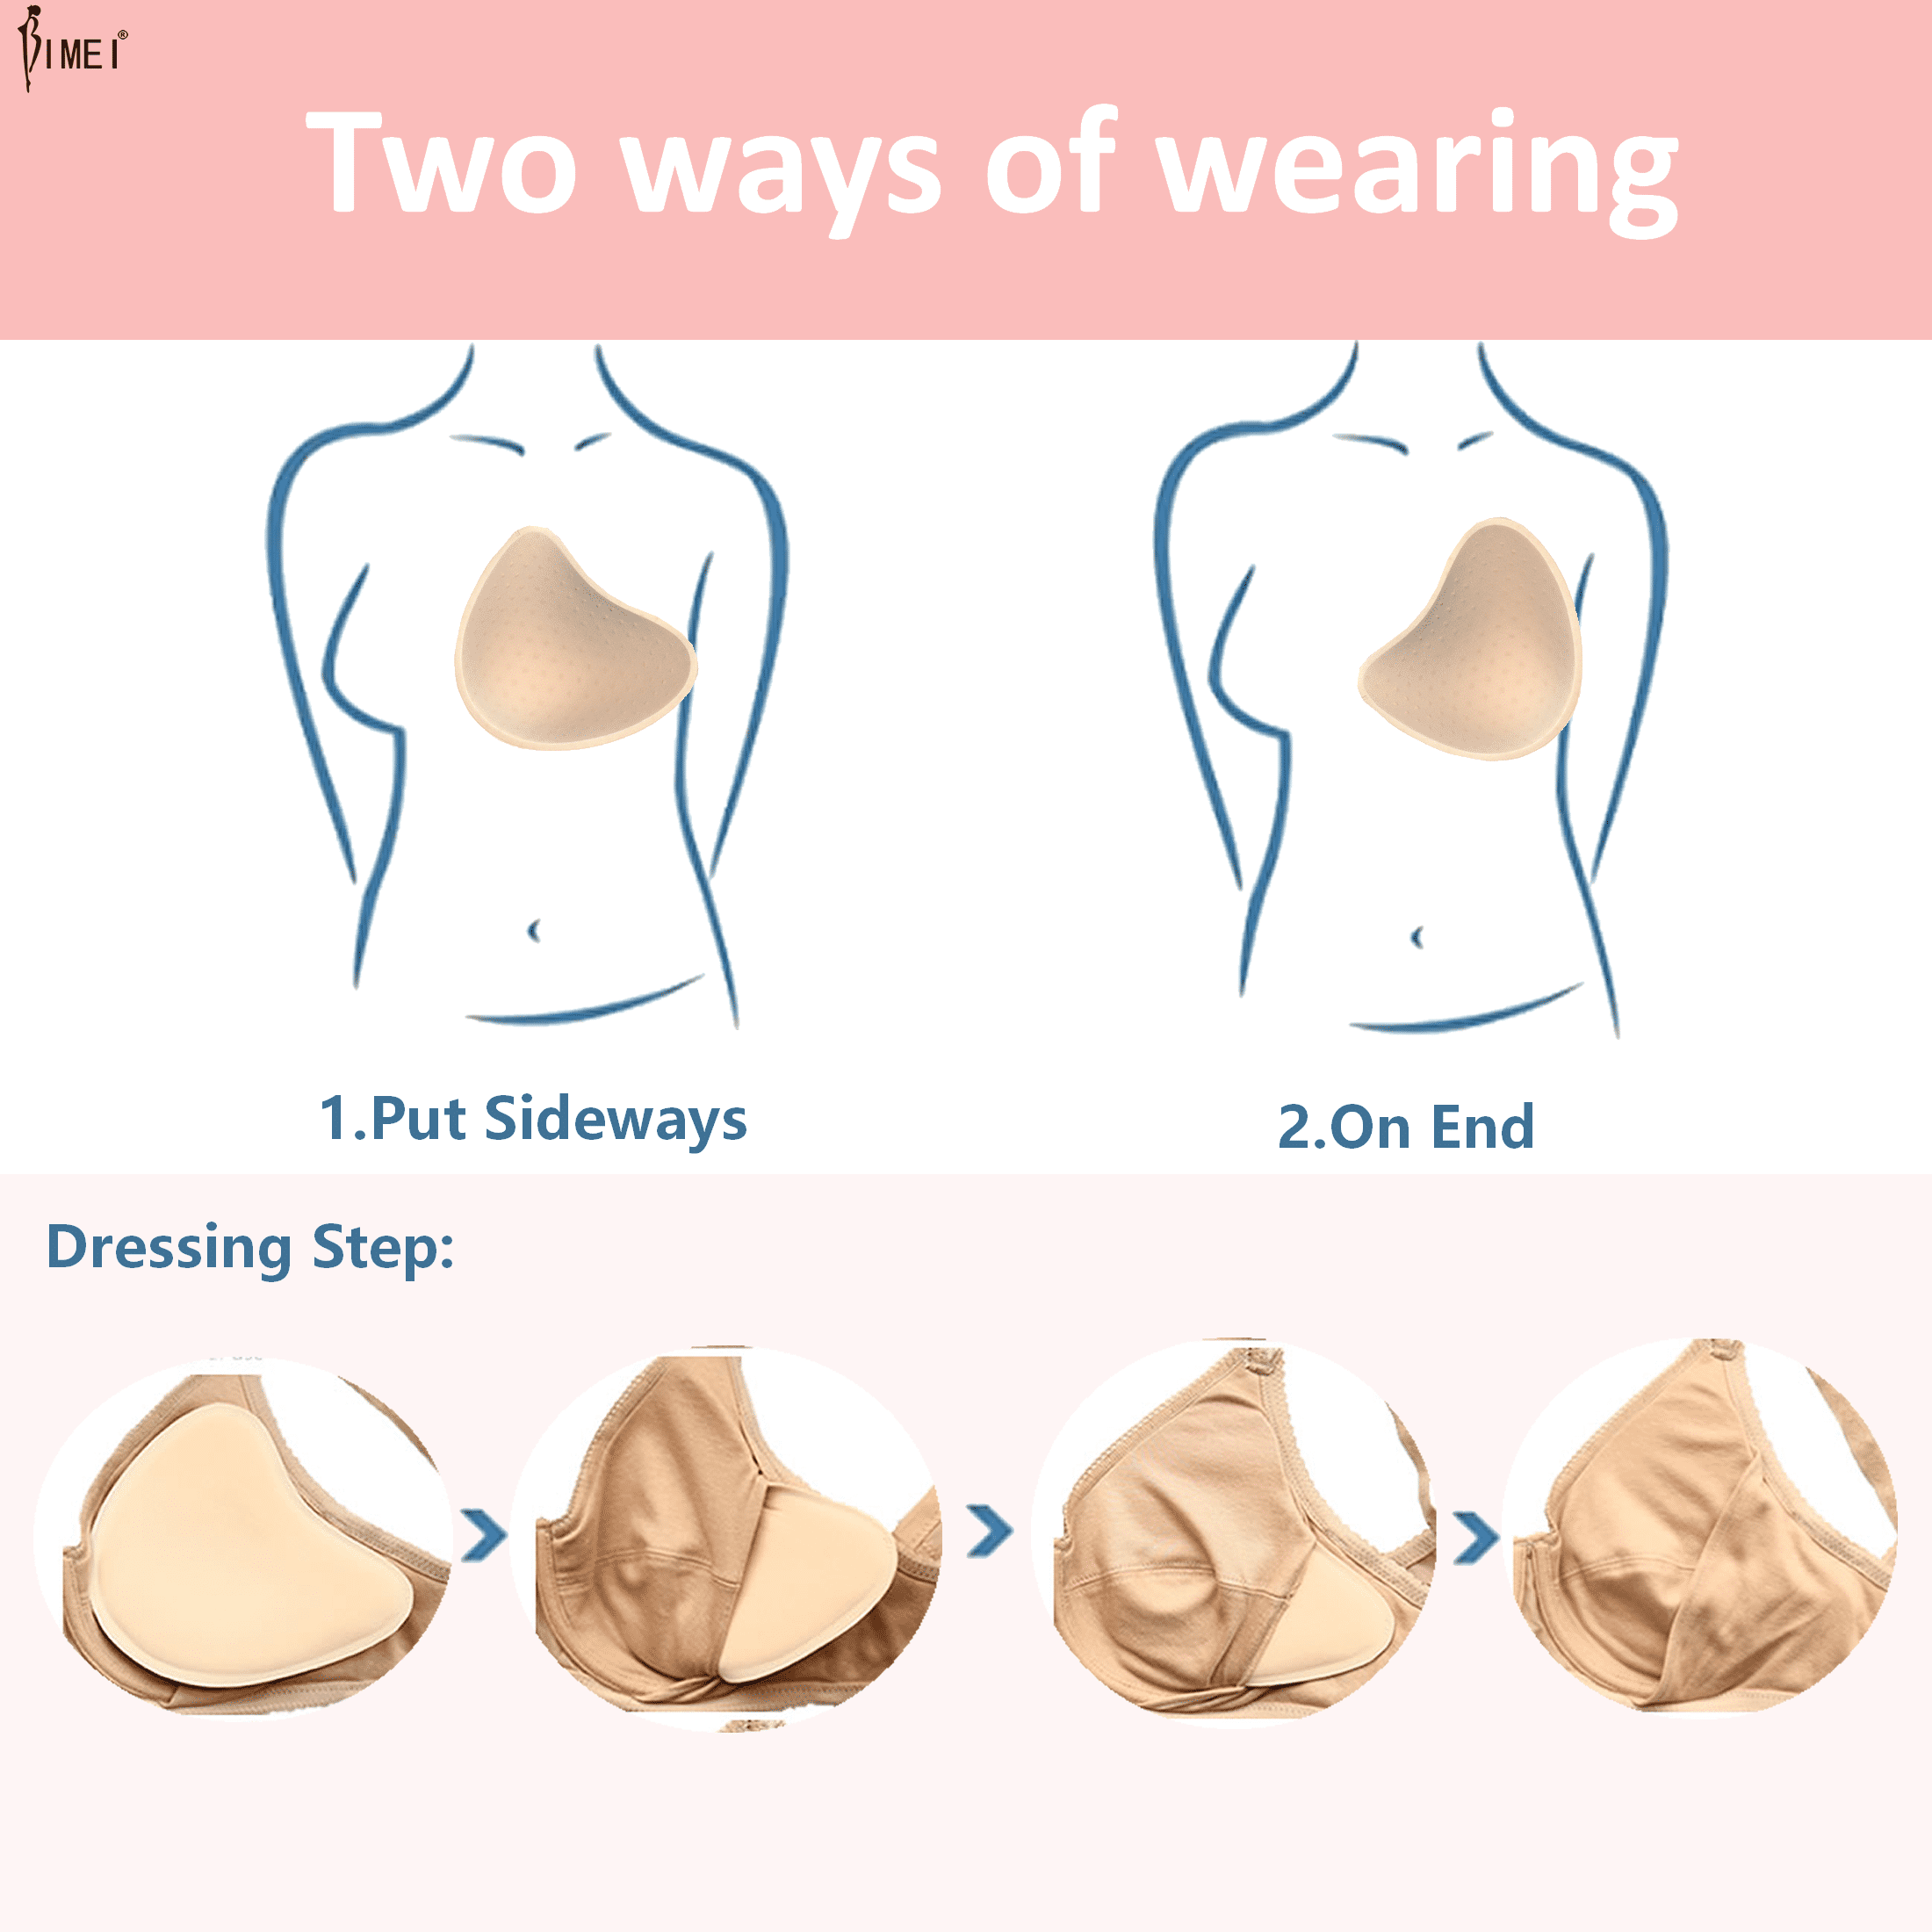 BIMEI Cotton Breast Forms Breast Prosthesis Mastectomy Bra Insert Pads  Light-weight Ventilation Sponge Boobs for Women Mastectomy Breast Cancer  Support #3,Holey Spiral,1 Piece,Left,S 